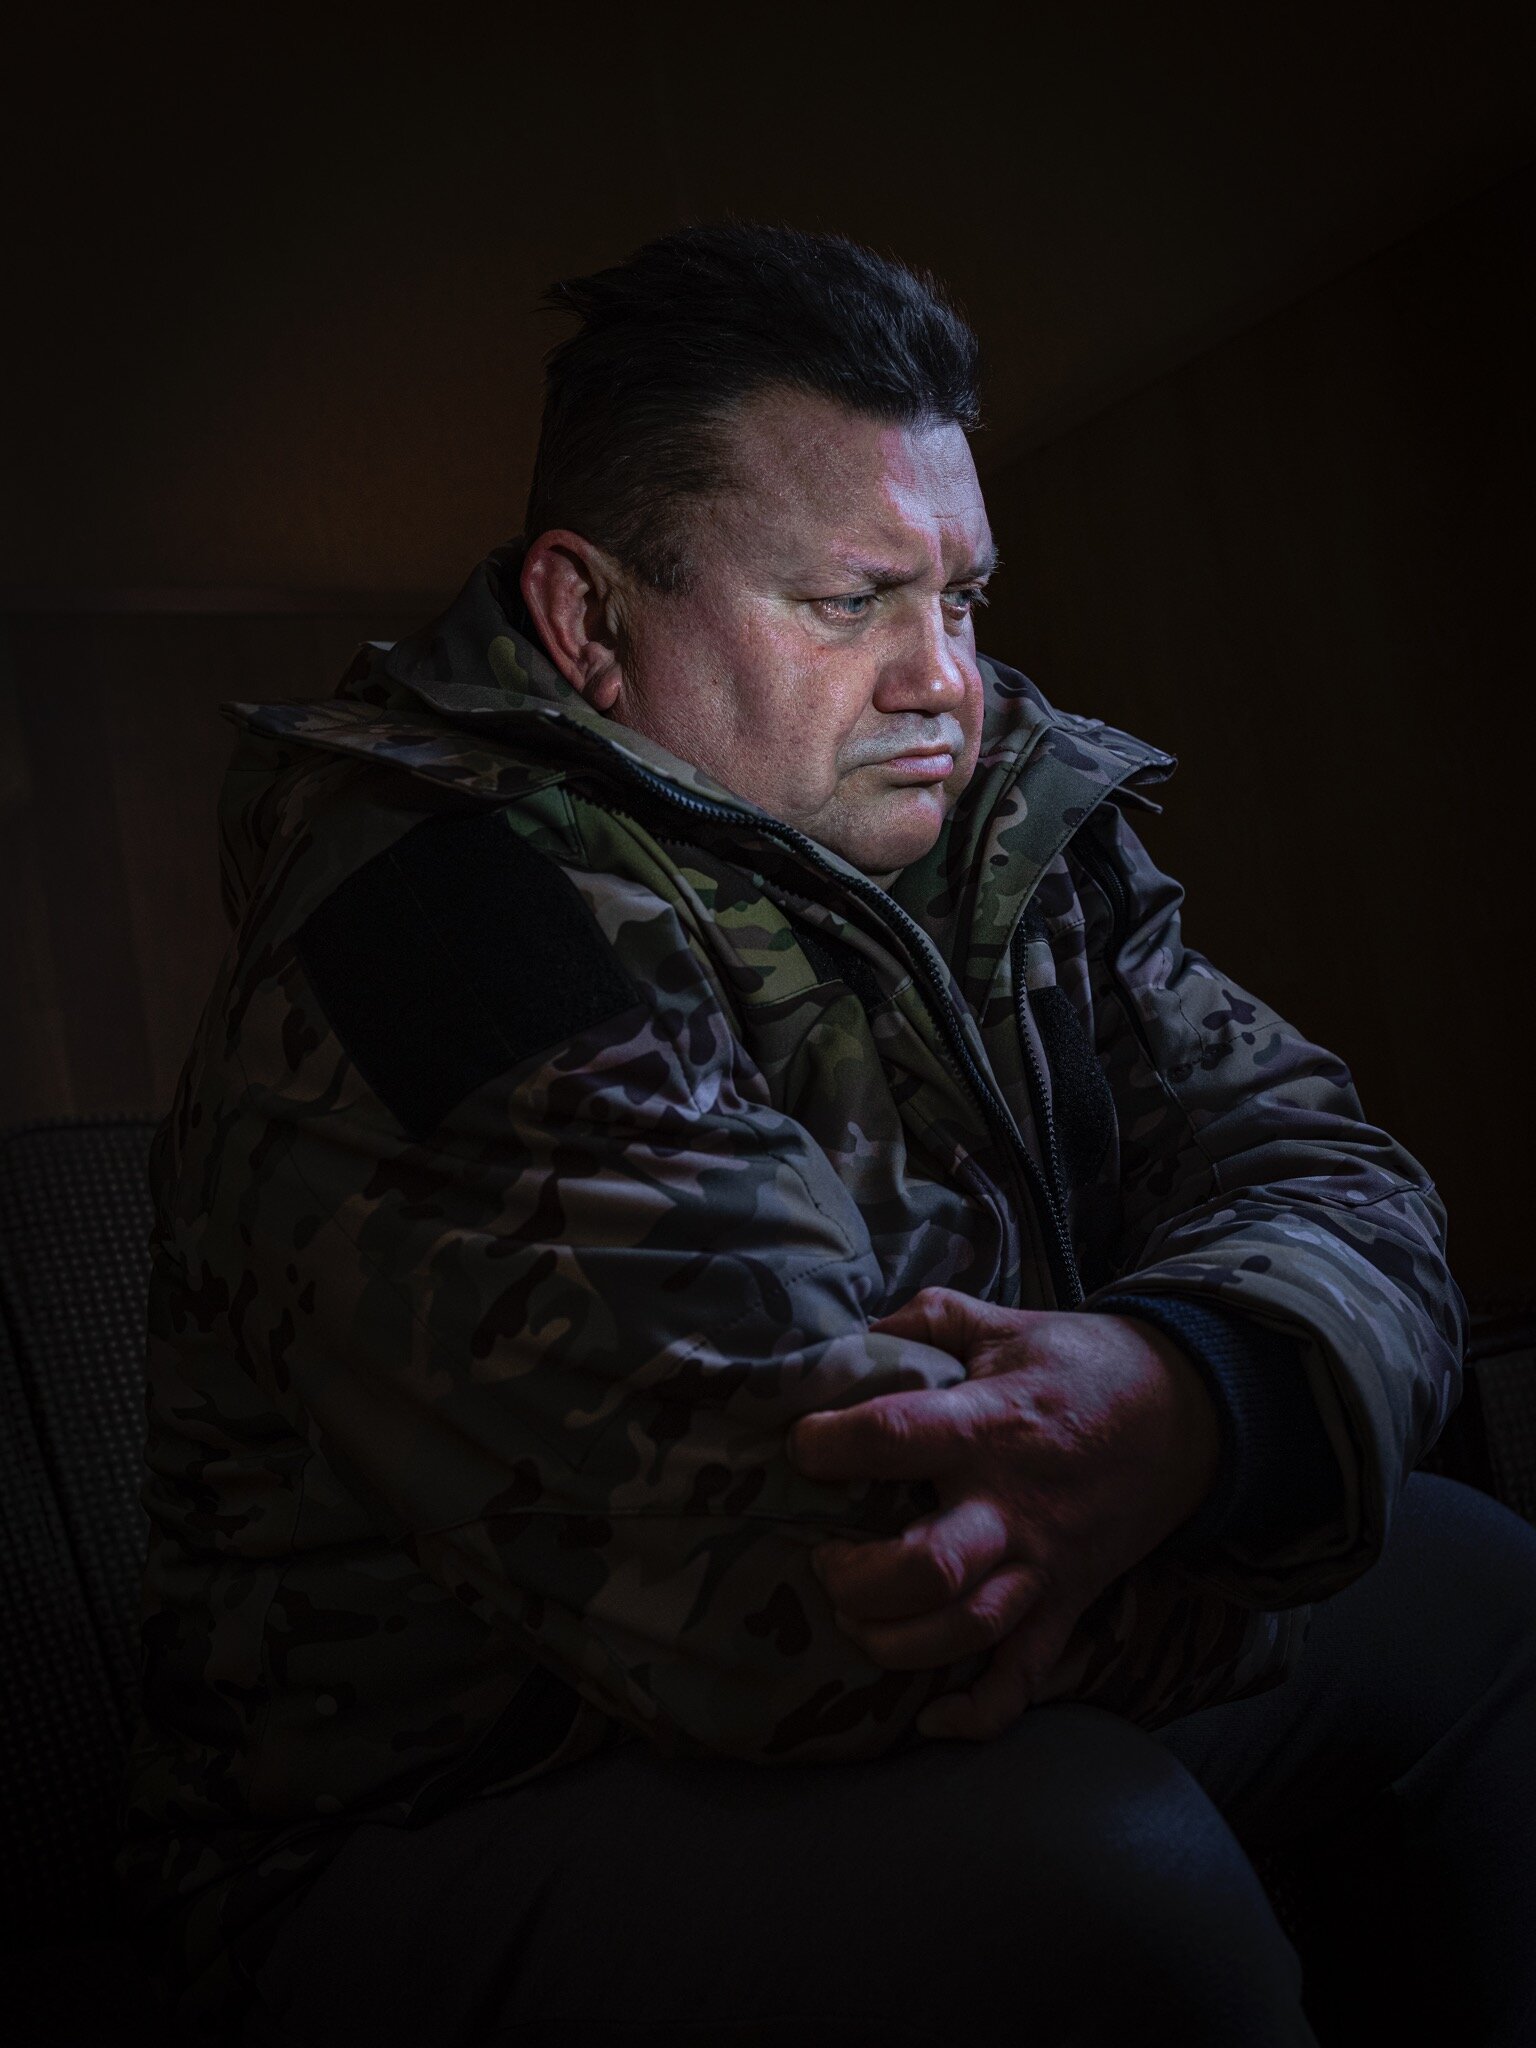 19mag-Ukraine-08-mobileMasterAt3x ‘I Live in Hell’: The Psychic Wounds of Ukraine’s Soldiers